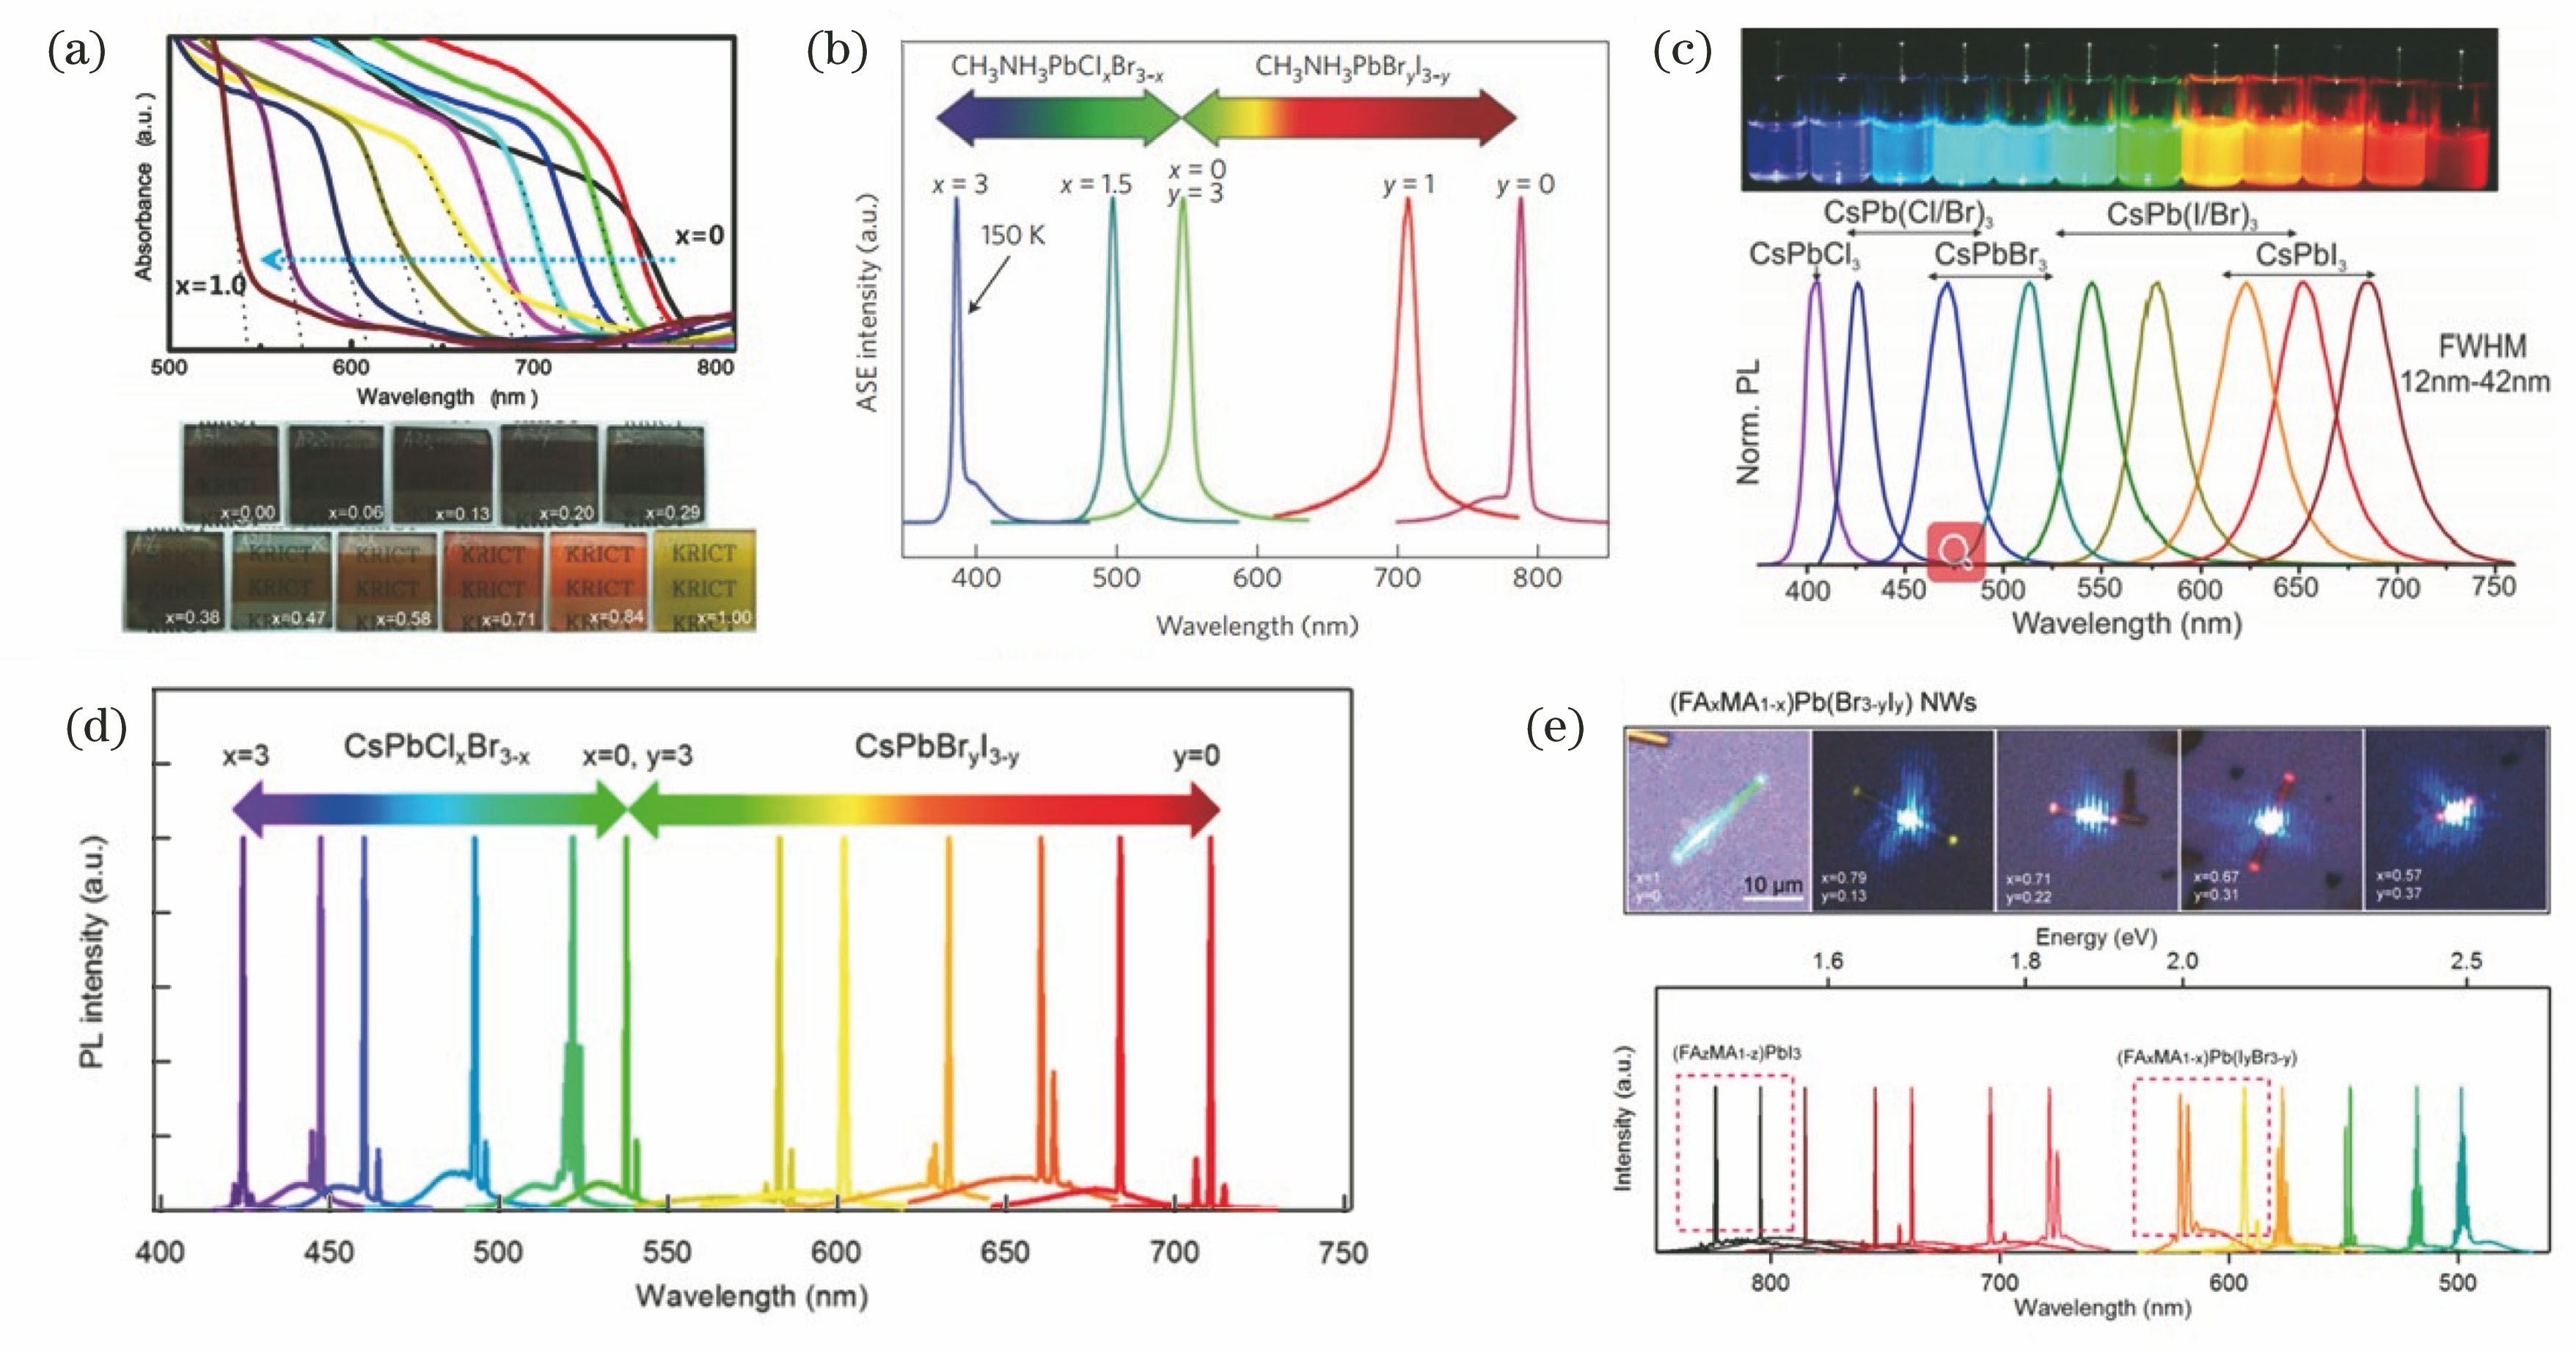 Wavelength tunability of perovskite nanomaterials. (a) By changing the ratio of iodine to bromine in MAPb(I1-xBrx)3, tuning of 786 to 544 nm can be achieved. Above is the absorption spectrum, below is an image of the nanocomposite[40]; (b) MAPbX3(X=Cl, Br, I) can be tuned to the emission wavelength from 390 to 790 nm in visible infrared by changing the ratio of hal